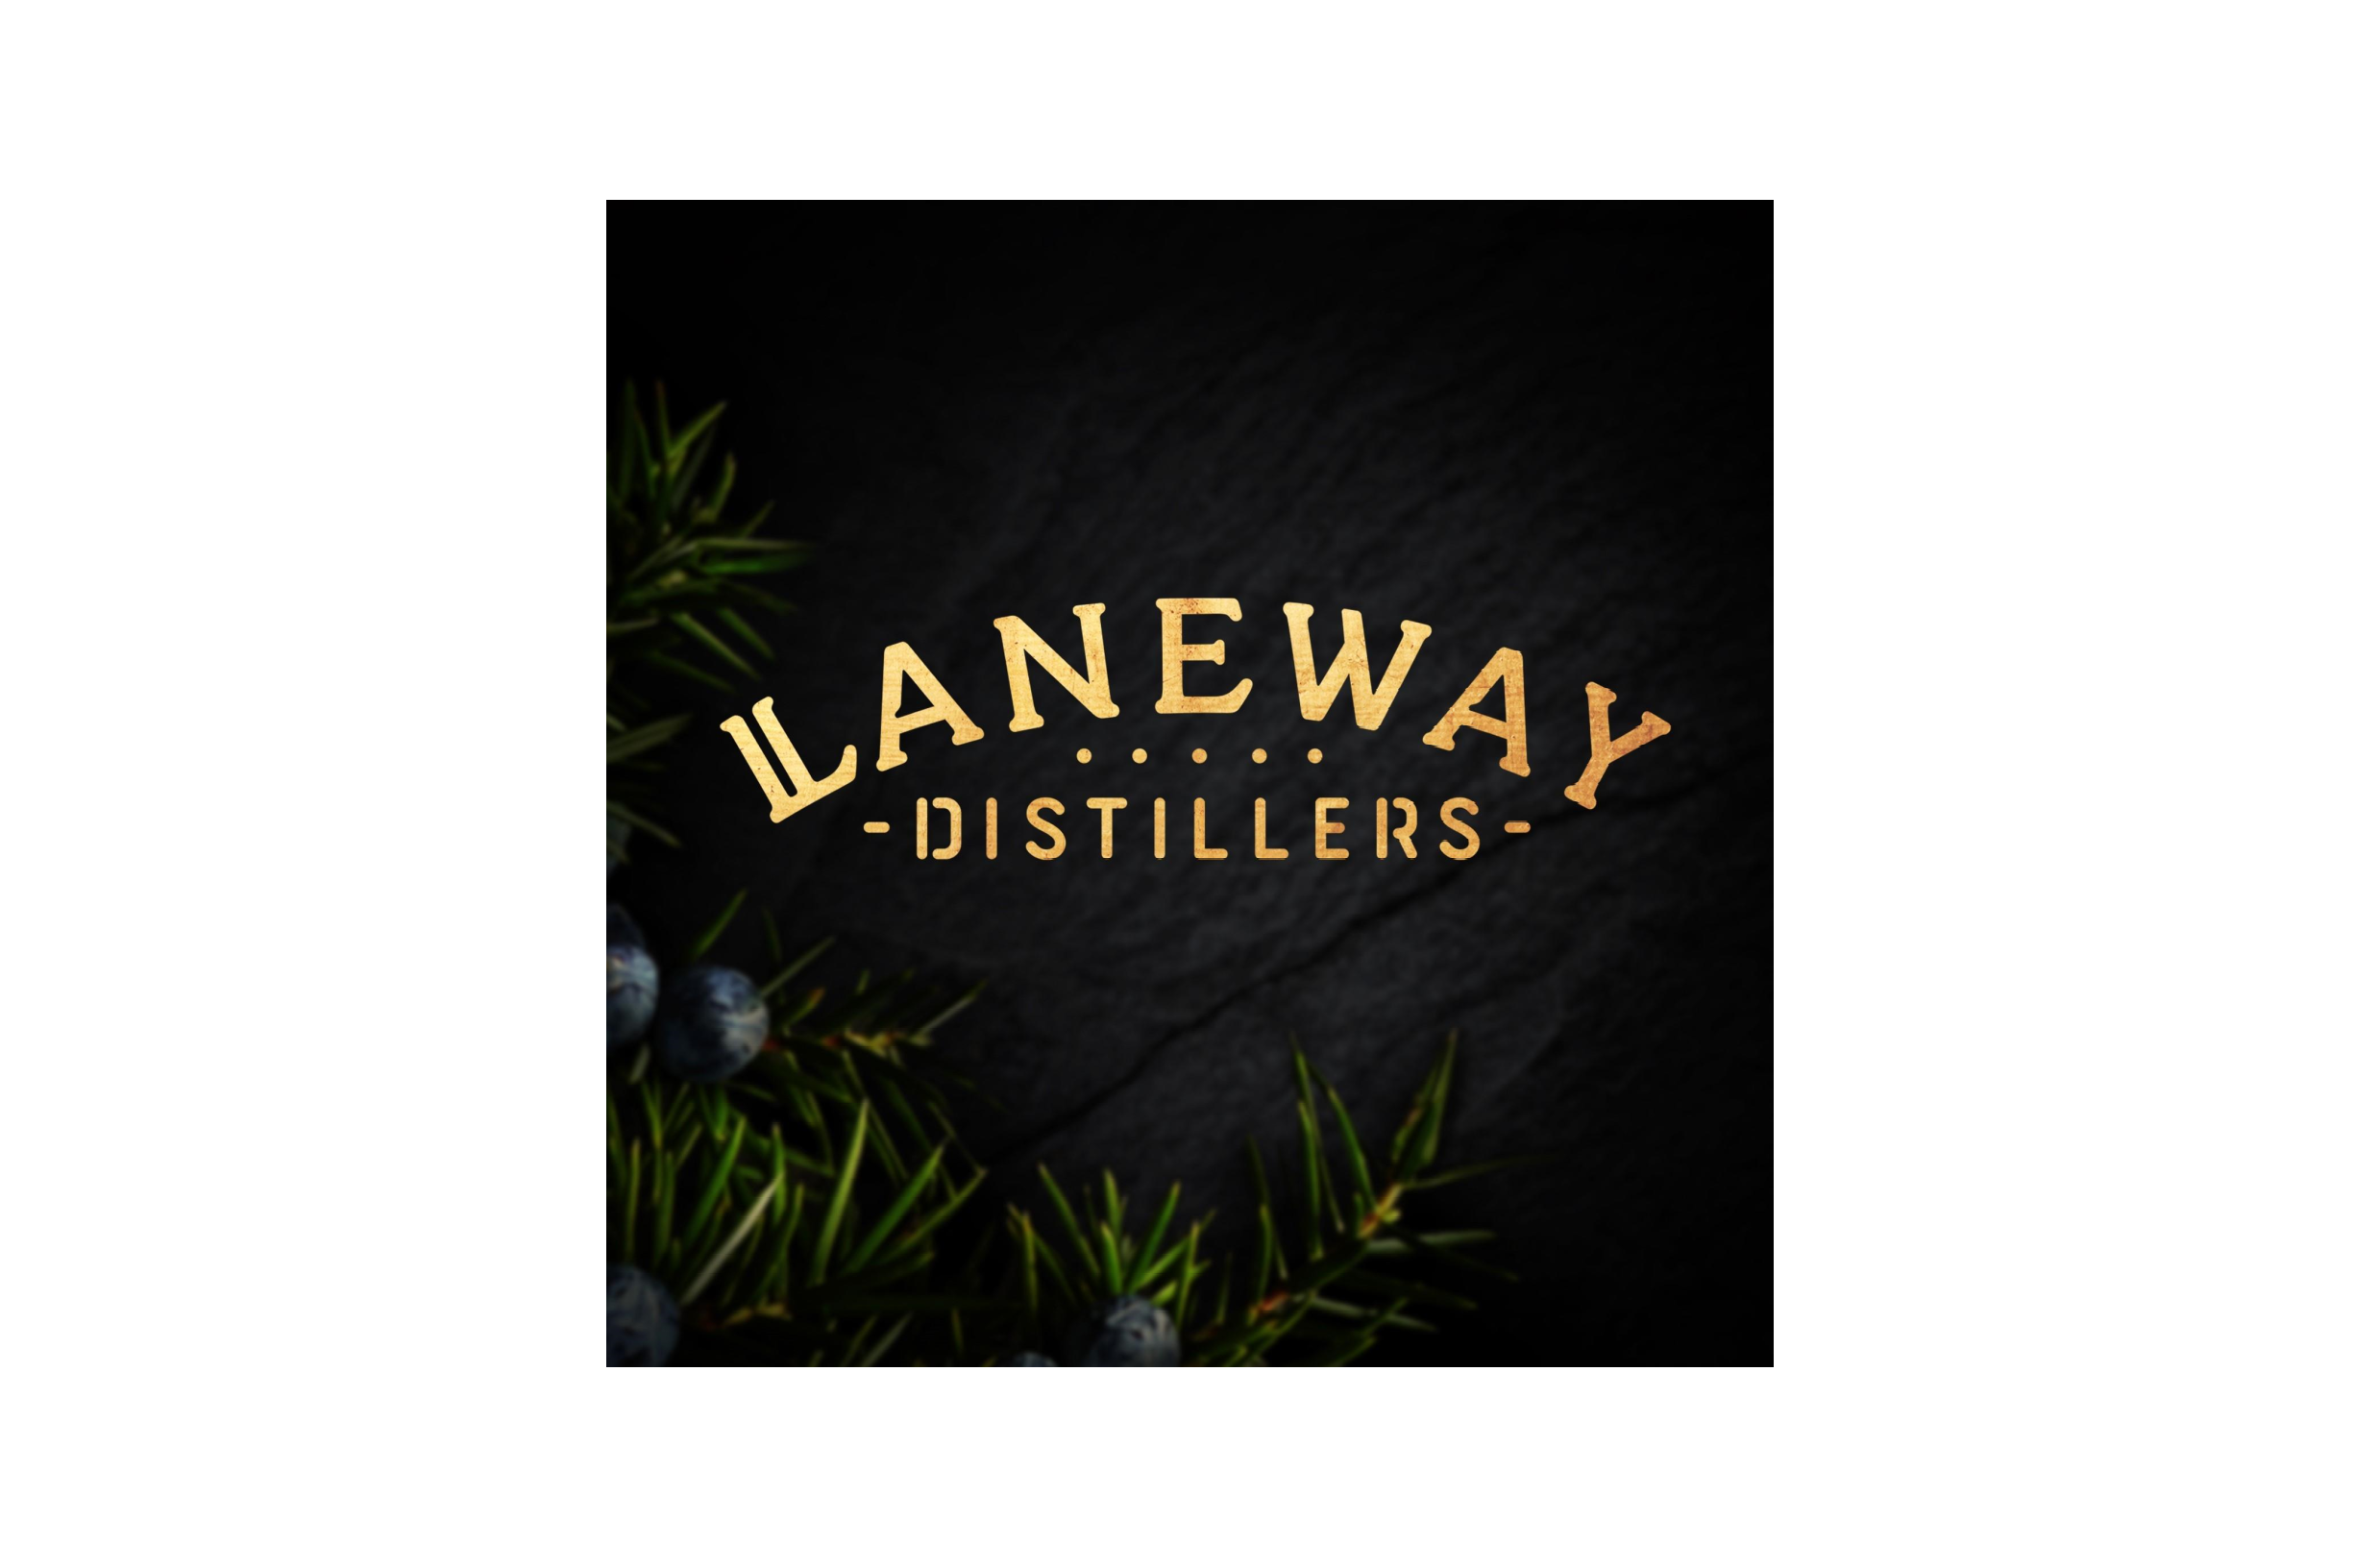 Step Into a World of Hidden Moments - Laneway Distillers